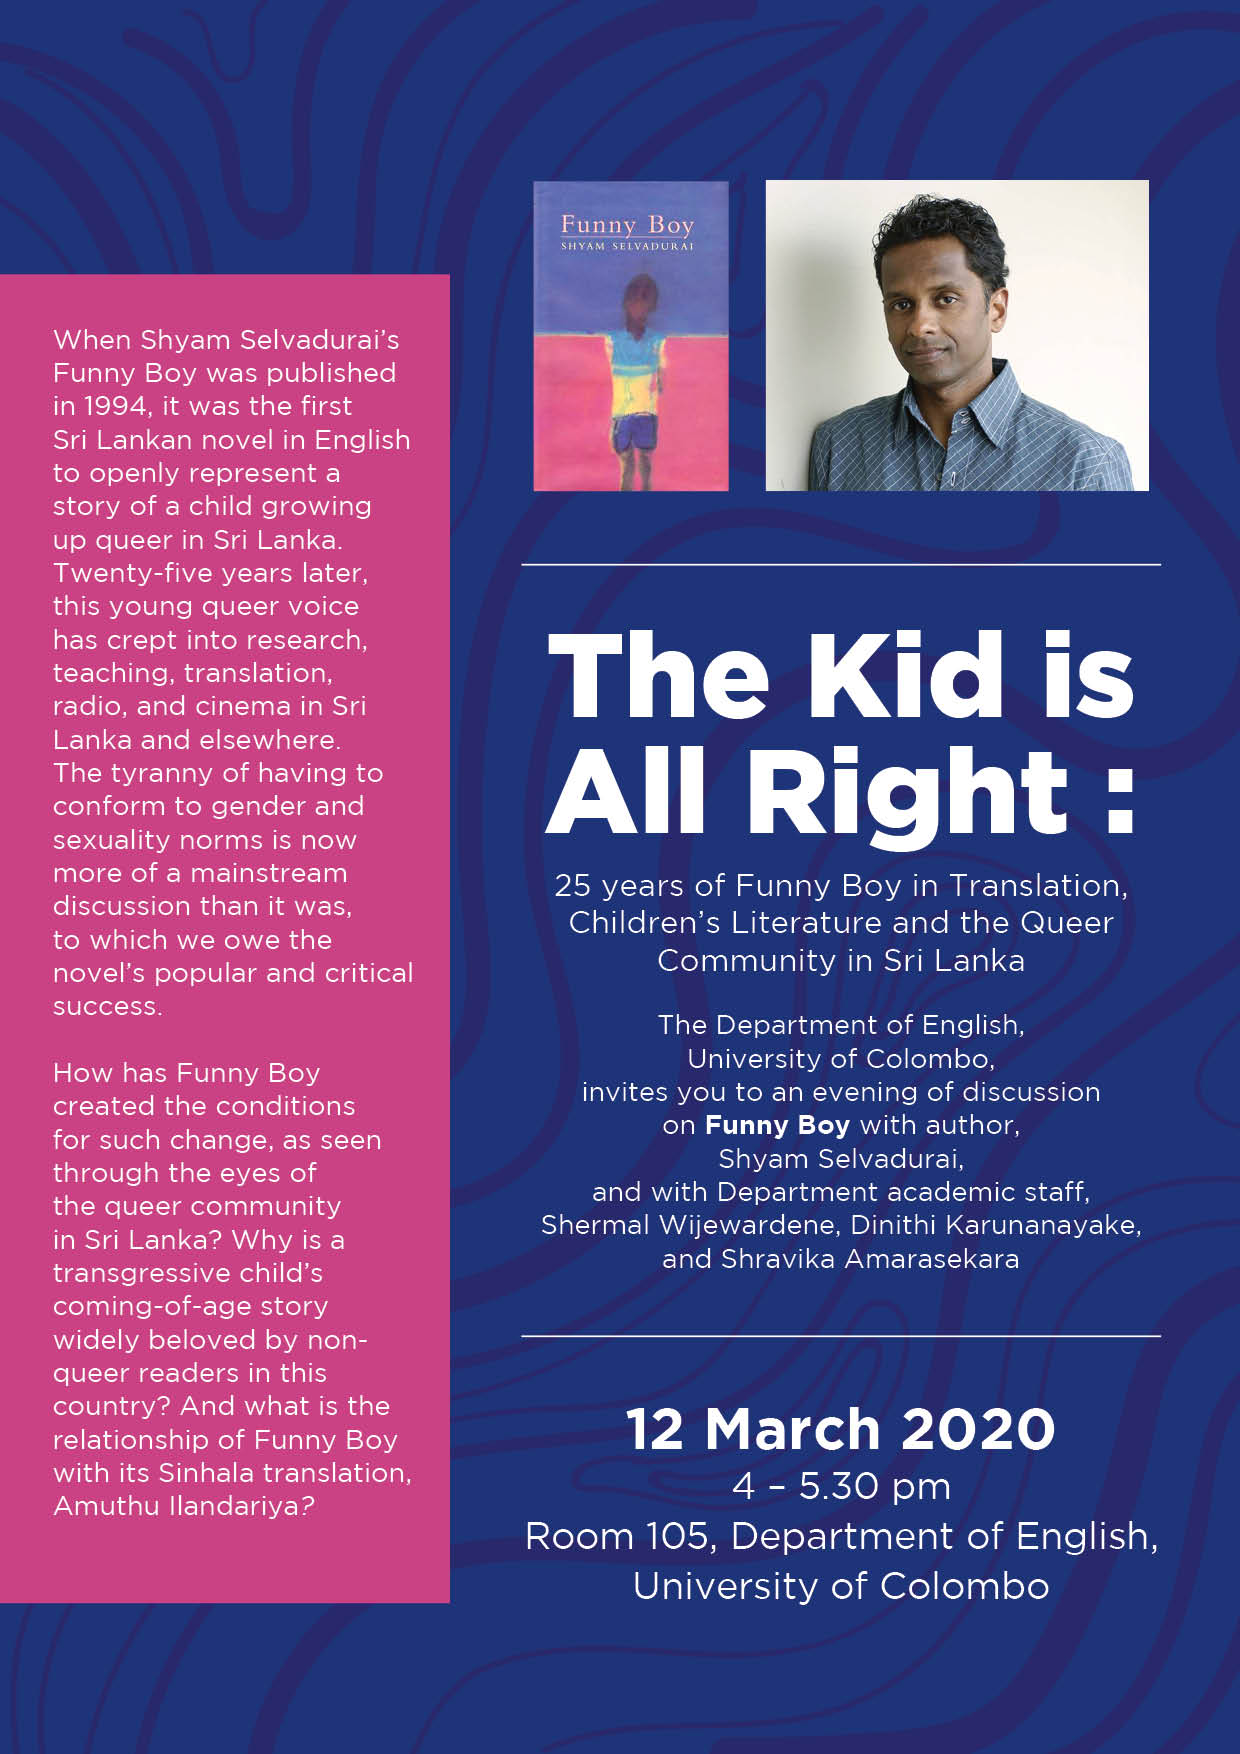 Discussion on Shyam Selvadurai’s “Funny Boy” – 12 March 2020